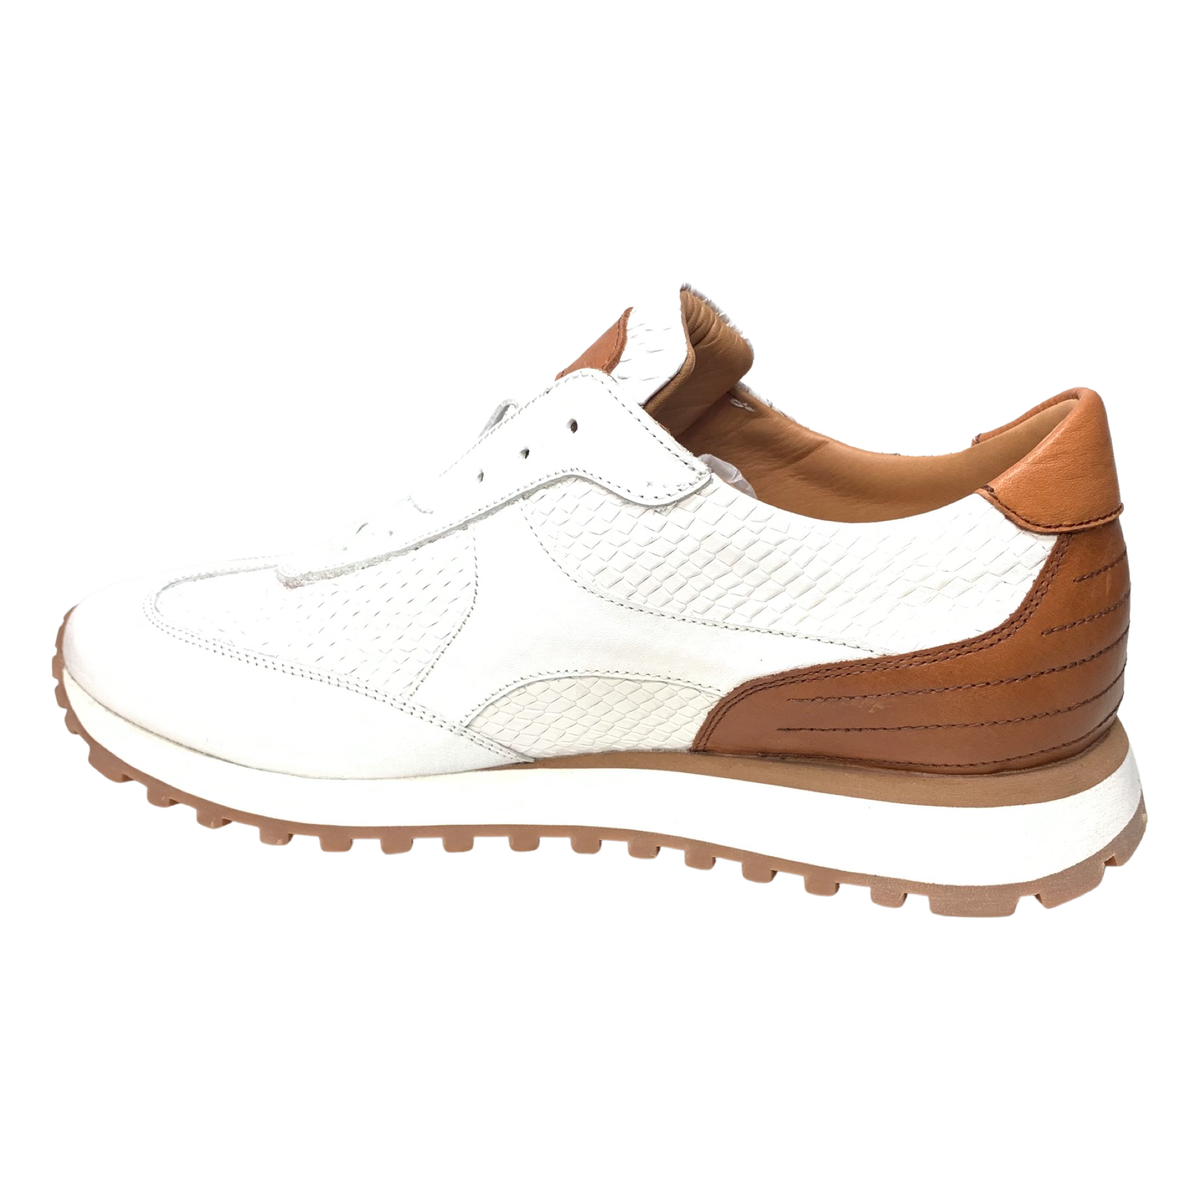 Sigotto White High-end Leather Sneakers - Dudes Boutique